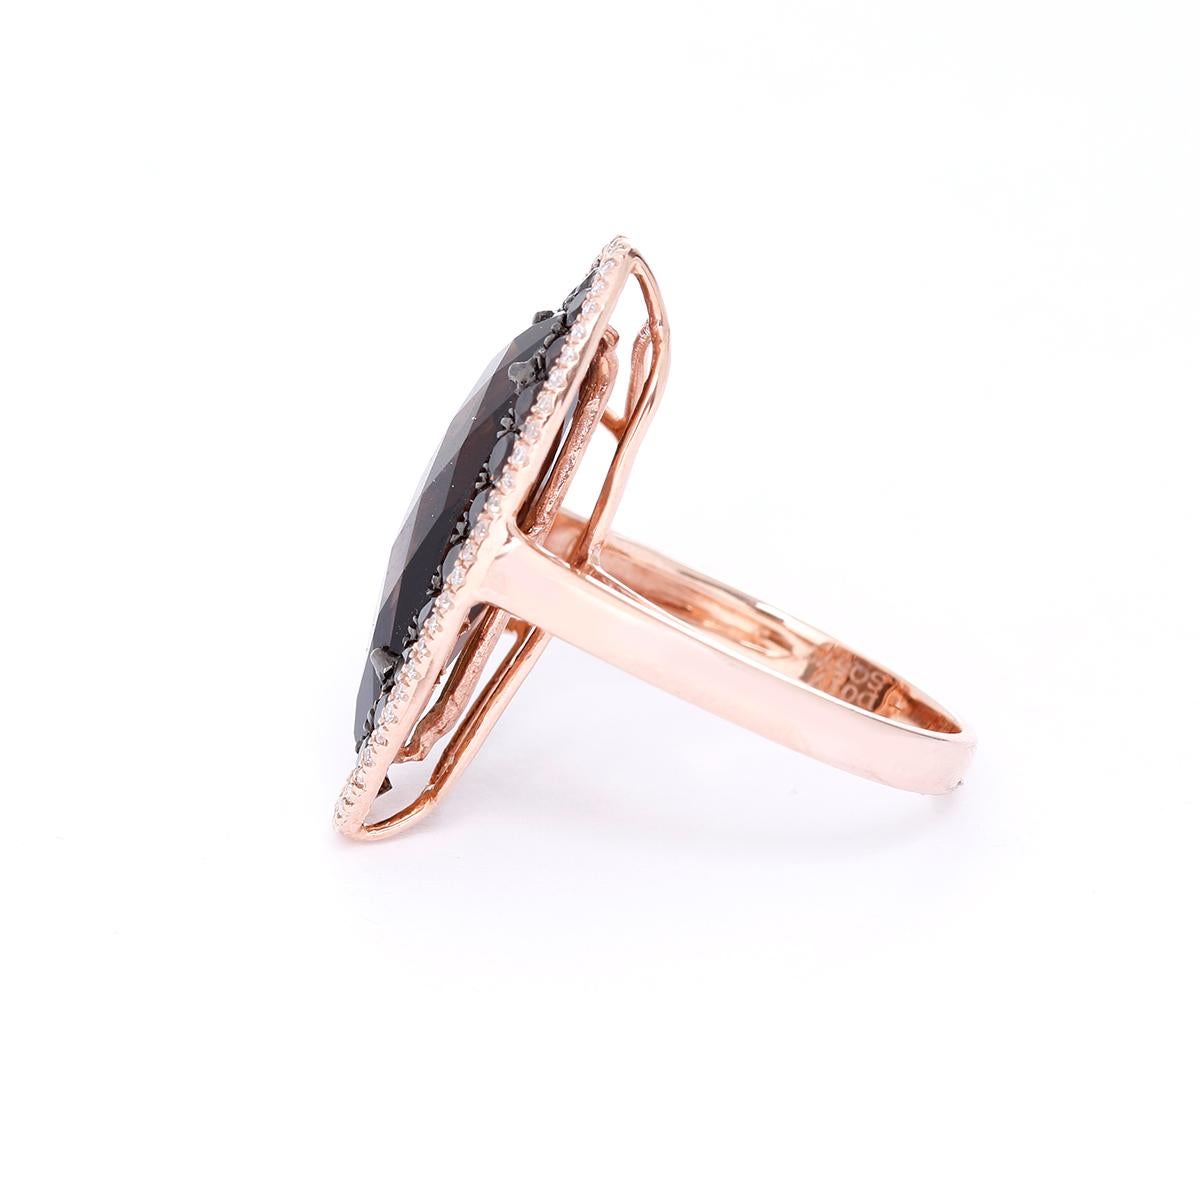 This amazing ring has 0.17 carats of  diamonds, 0.75 carats of smoky quartz ,and 1 piece fancy smoky quartz set in 14k rose gold. Ring measures apx. 5/8-inch in width at the widest and apx. 1-inch in length at the longest. 

Total weight is 6.2